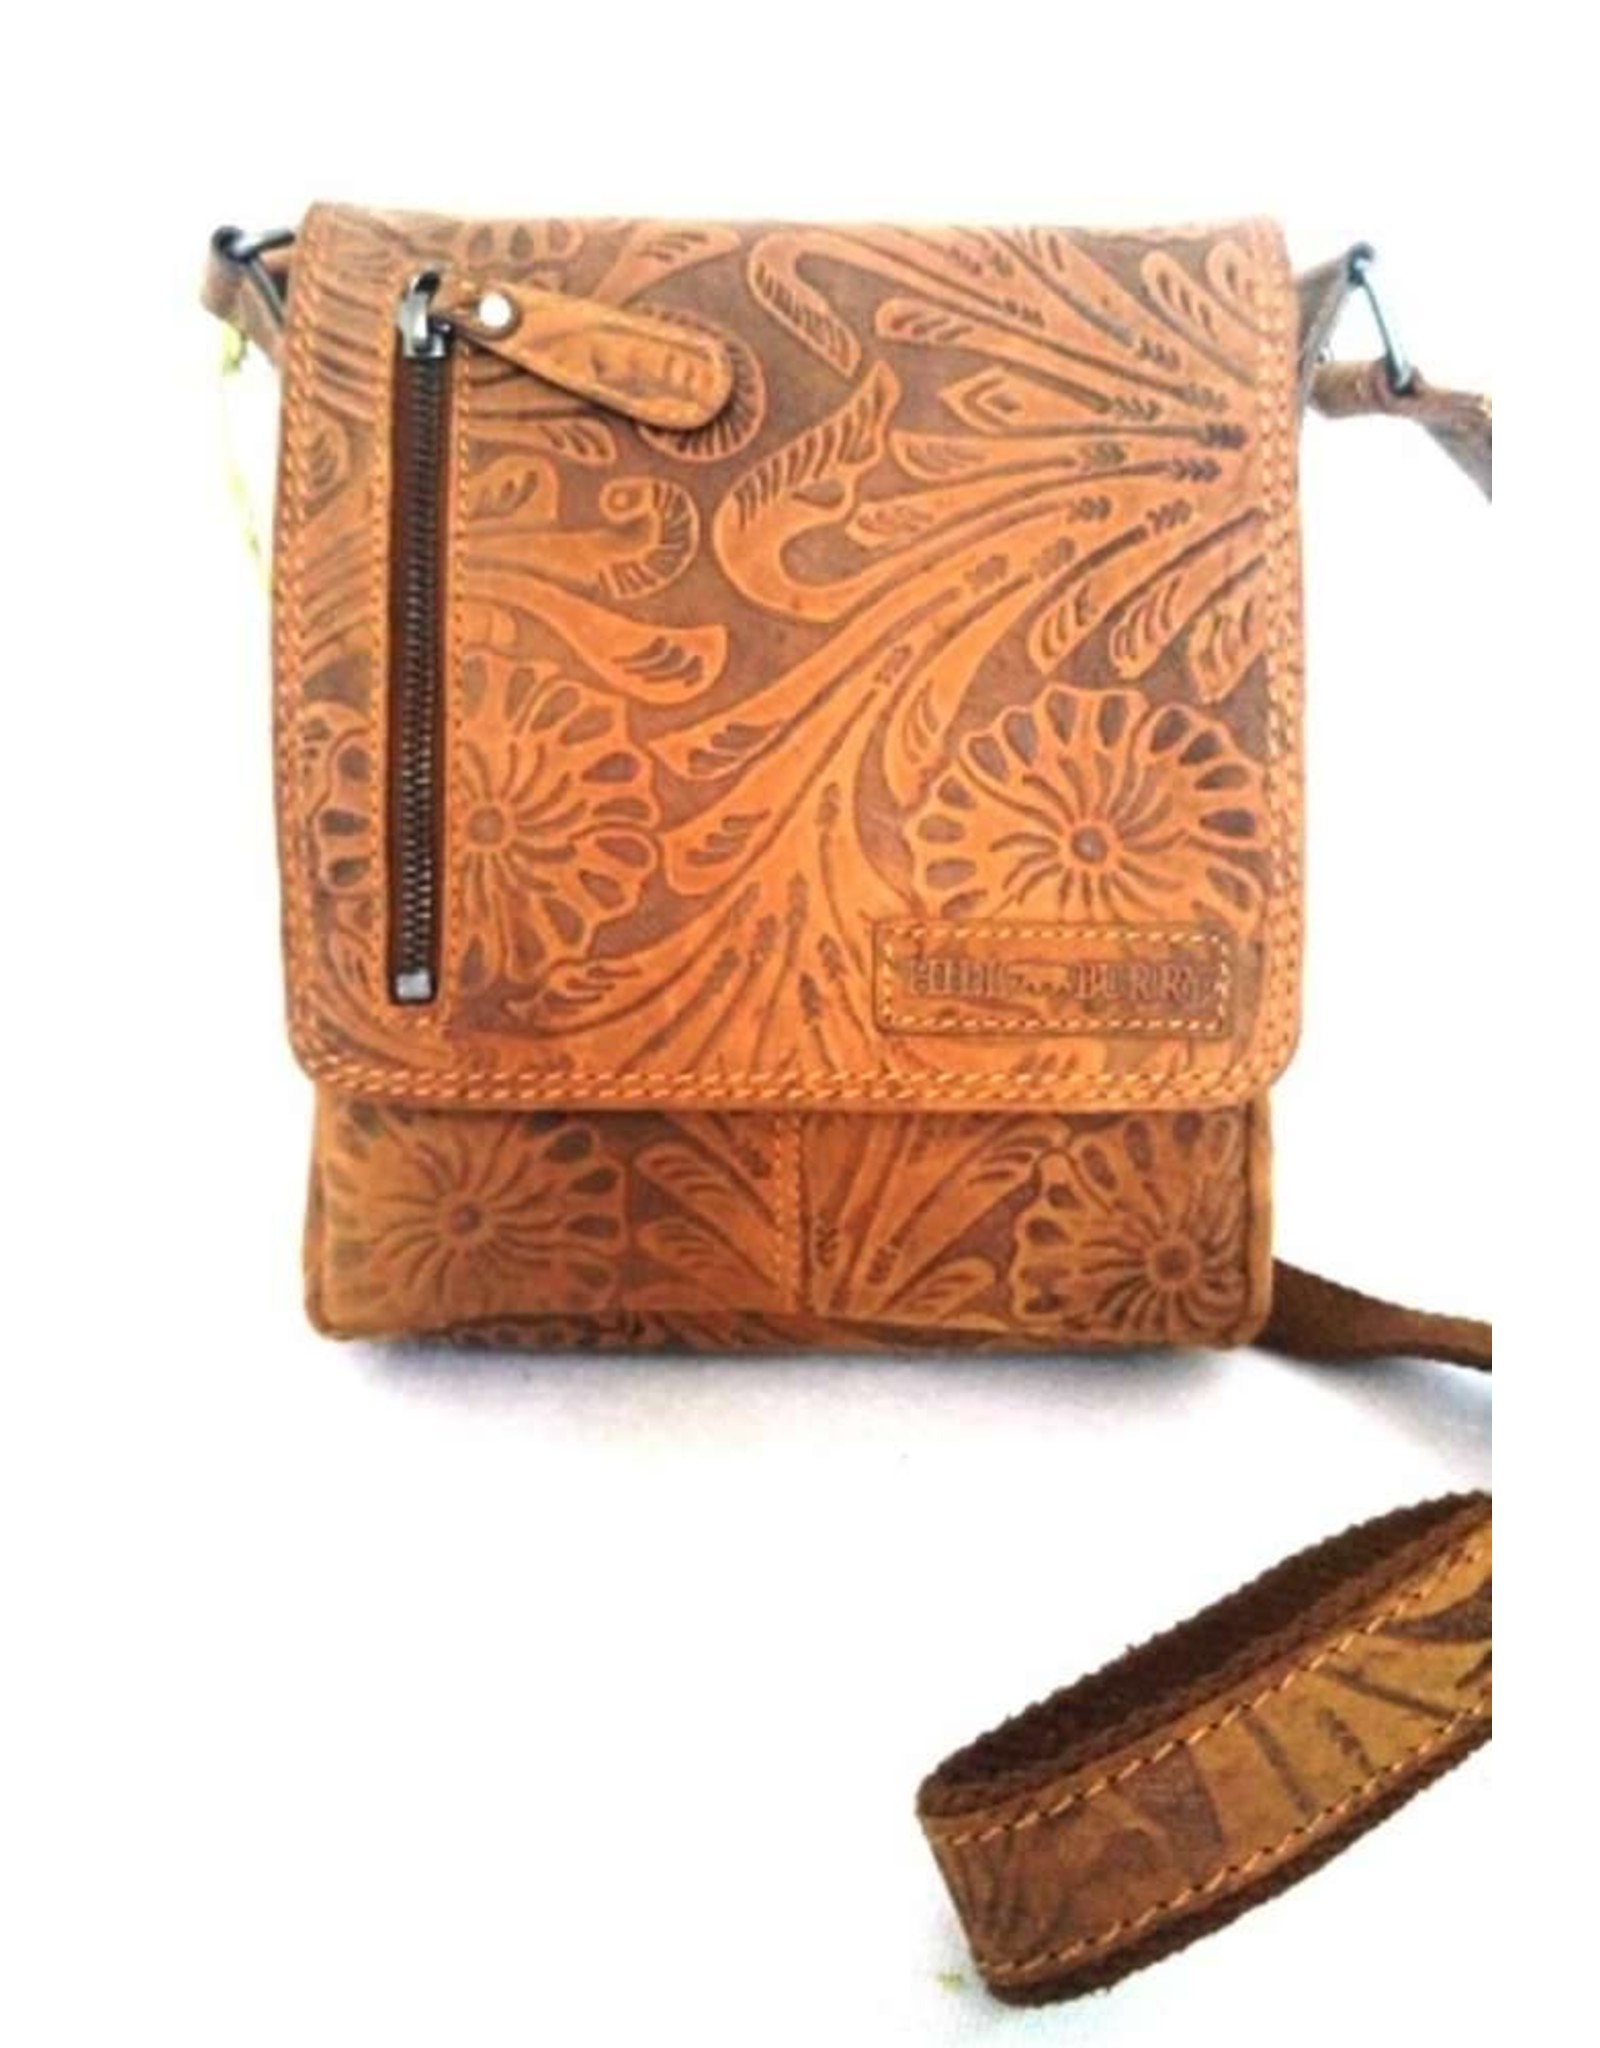 HillBurry Leather bags - Leather Shoulder Bag HillBurry with Floral pattern Natural